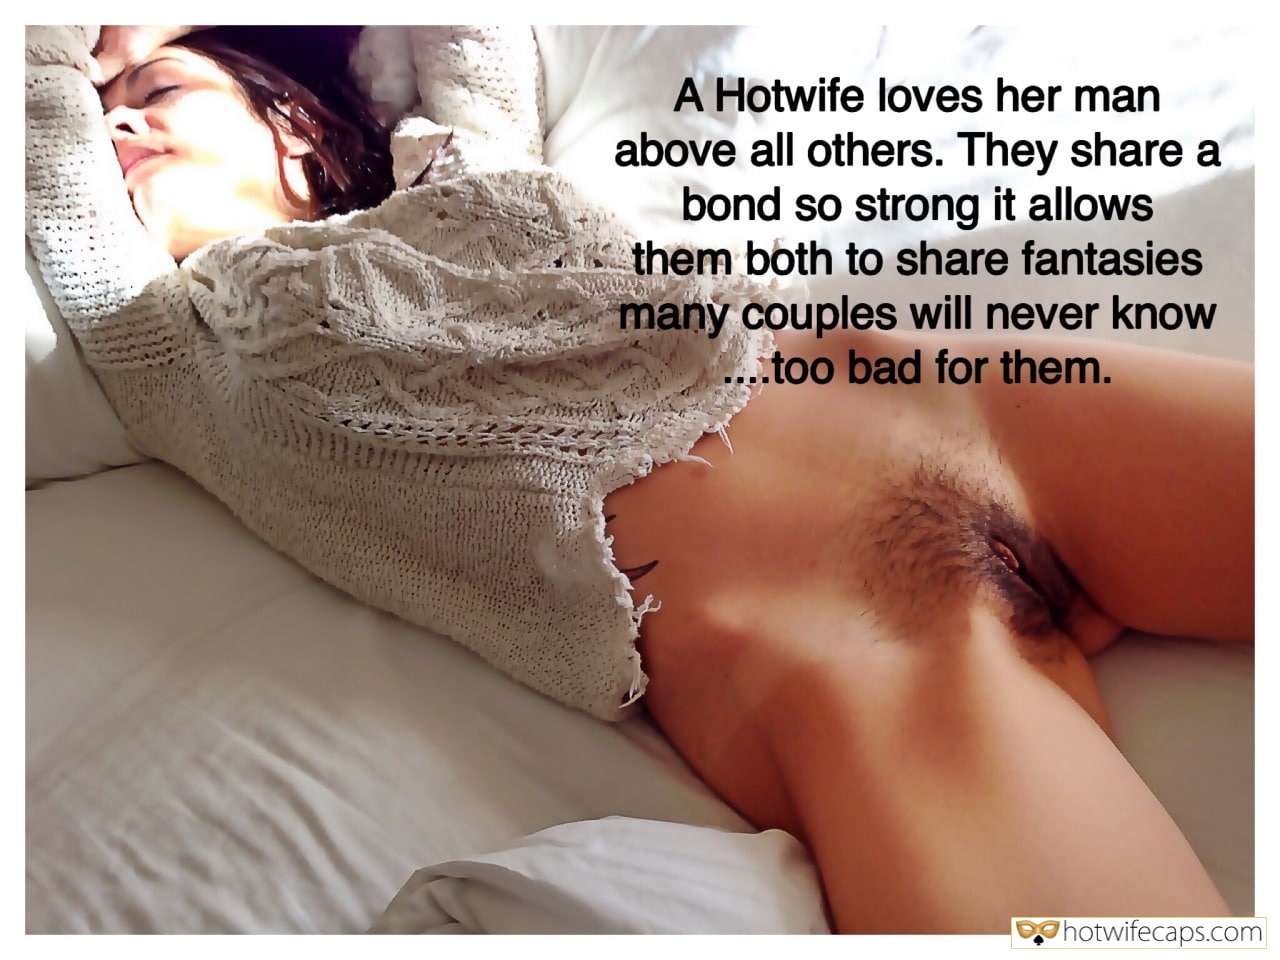 My Favorite hotwife caption: A Hotwife loves her man above all others. They share a bond so strong it allows them both to share fantasies many couples will never know …too bad for them. hairy pussy femdom caption lesbian wife husband life captions sexstories...